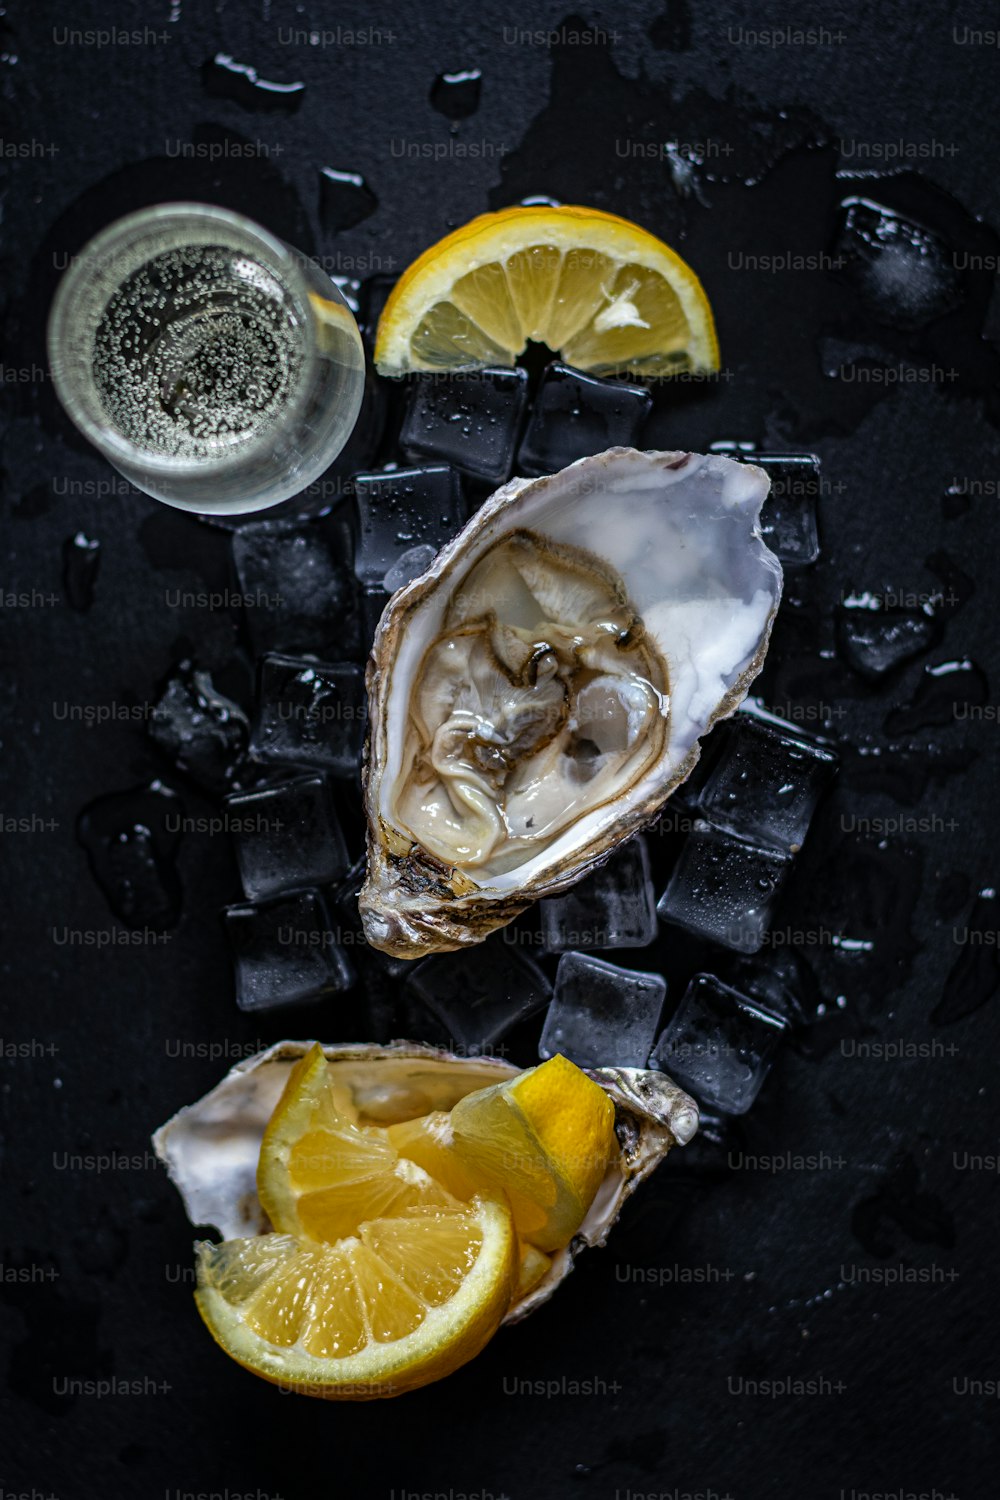 two oysters on ice with lemon slices and a glass of water